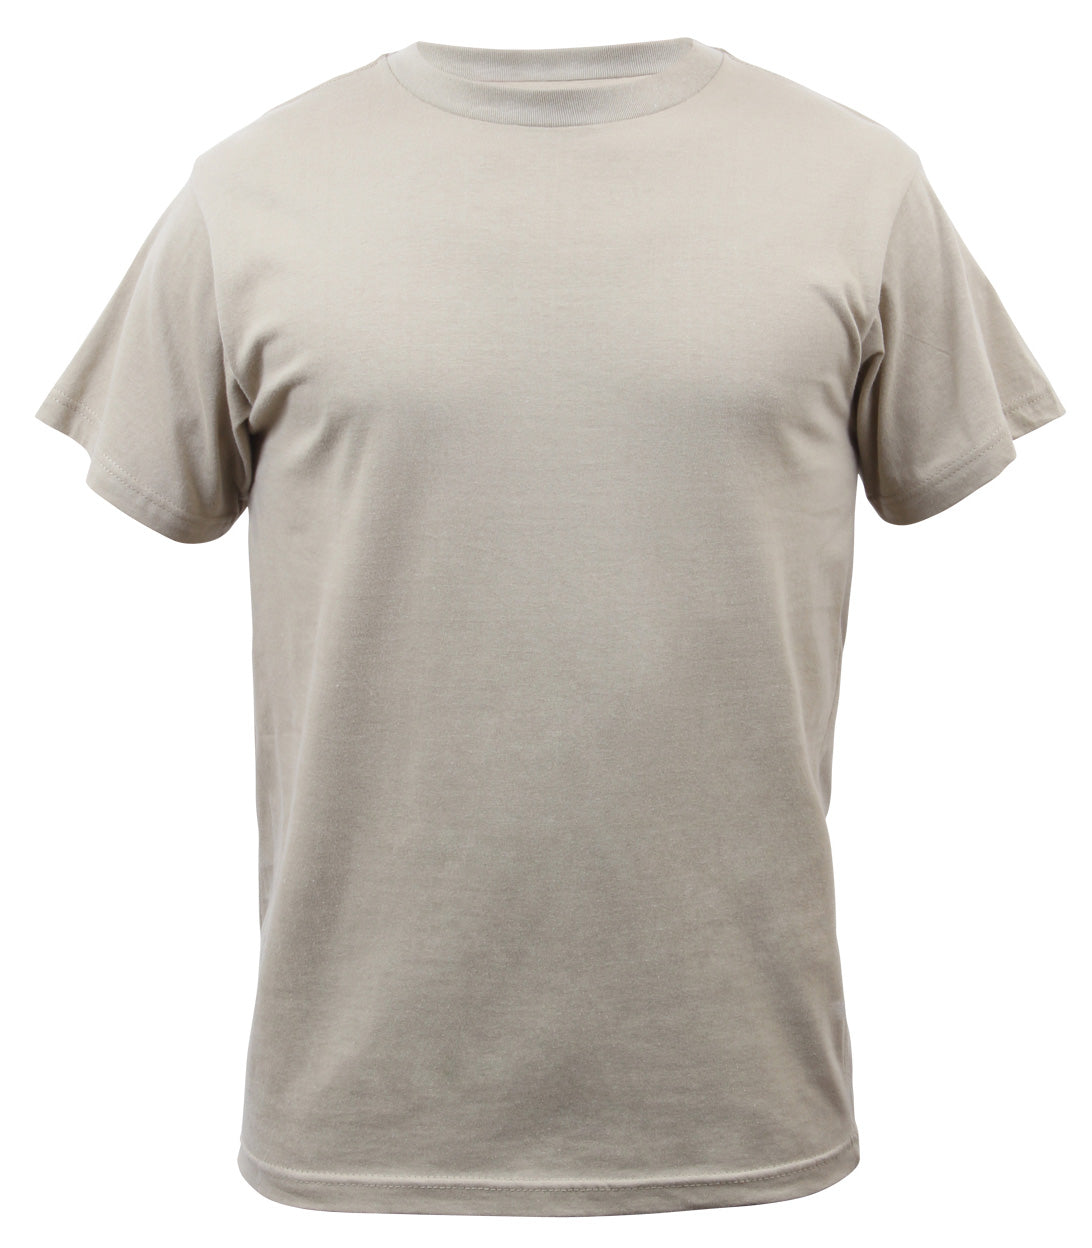 Rothco Solid Color 100% Cotton T-Shirt - Military Colors